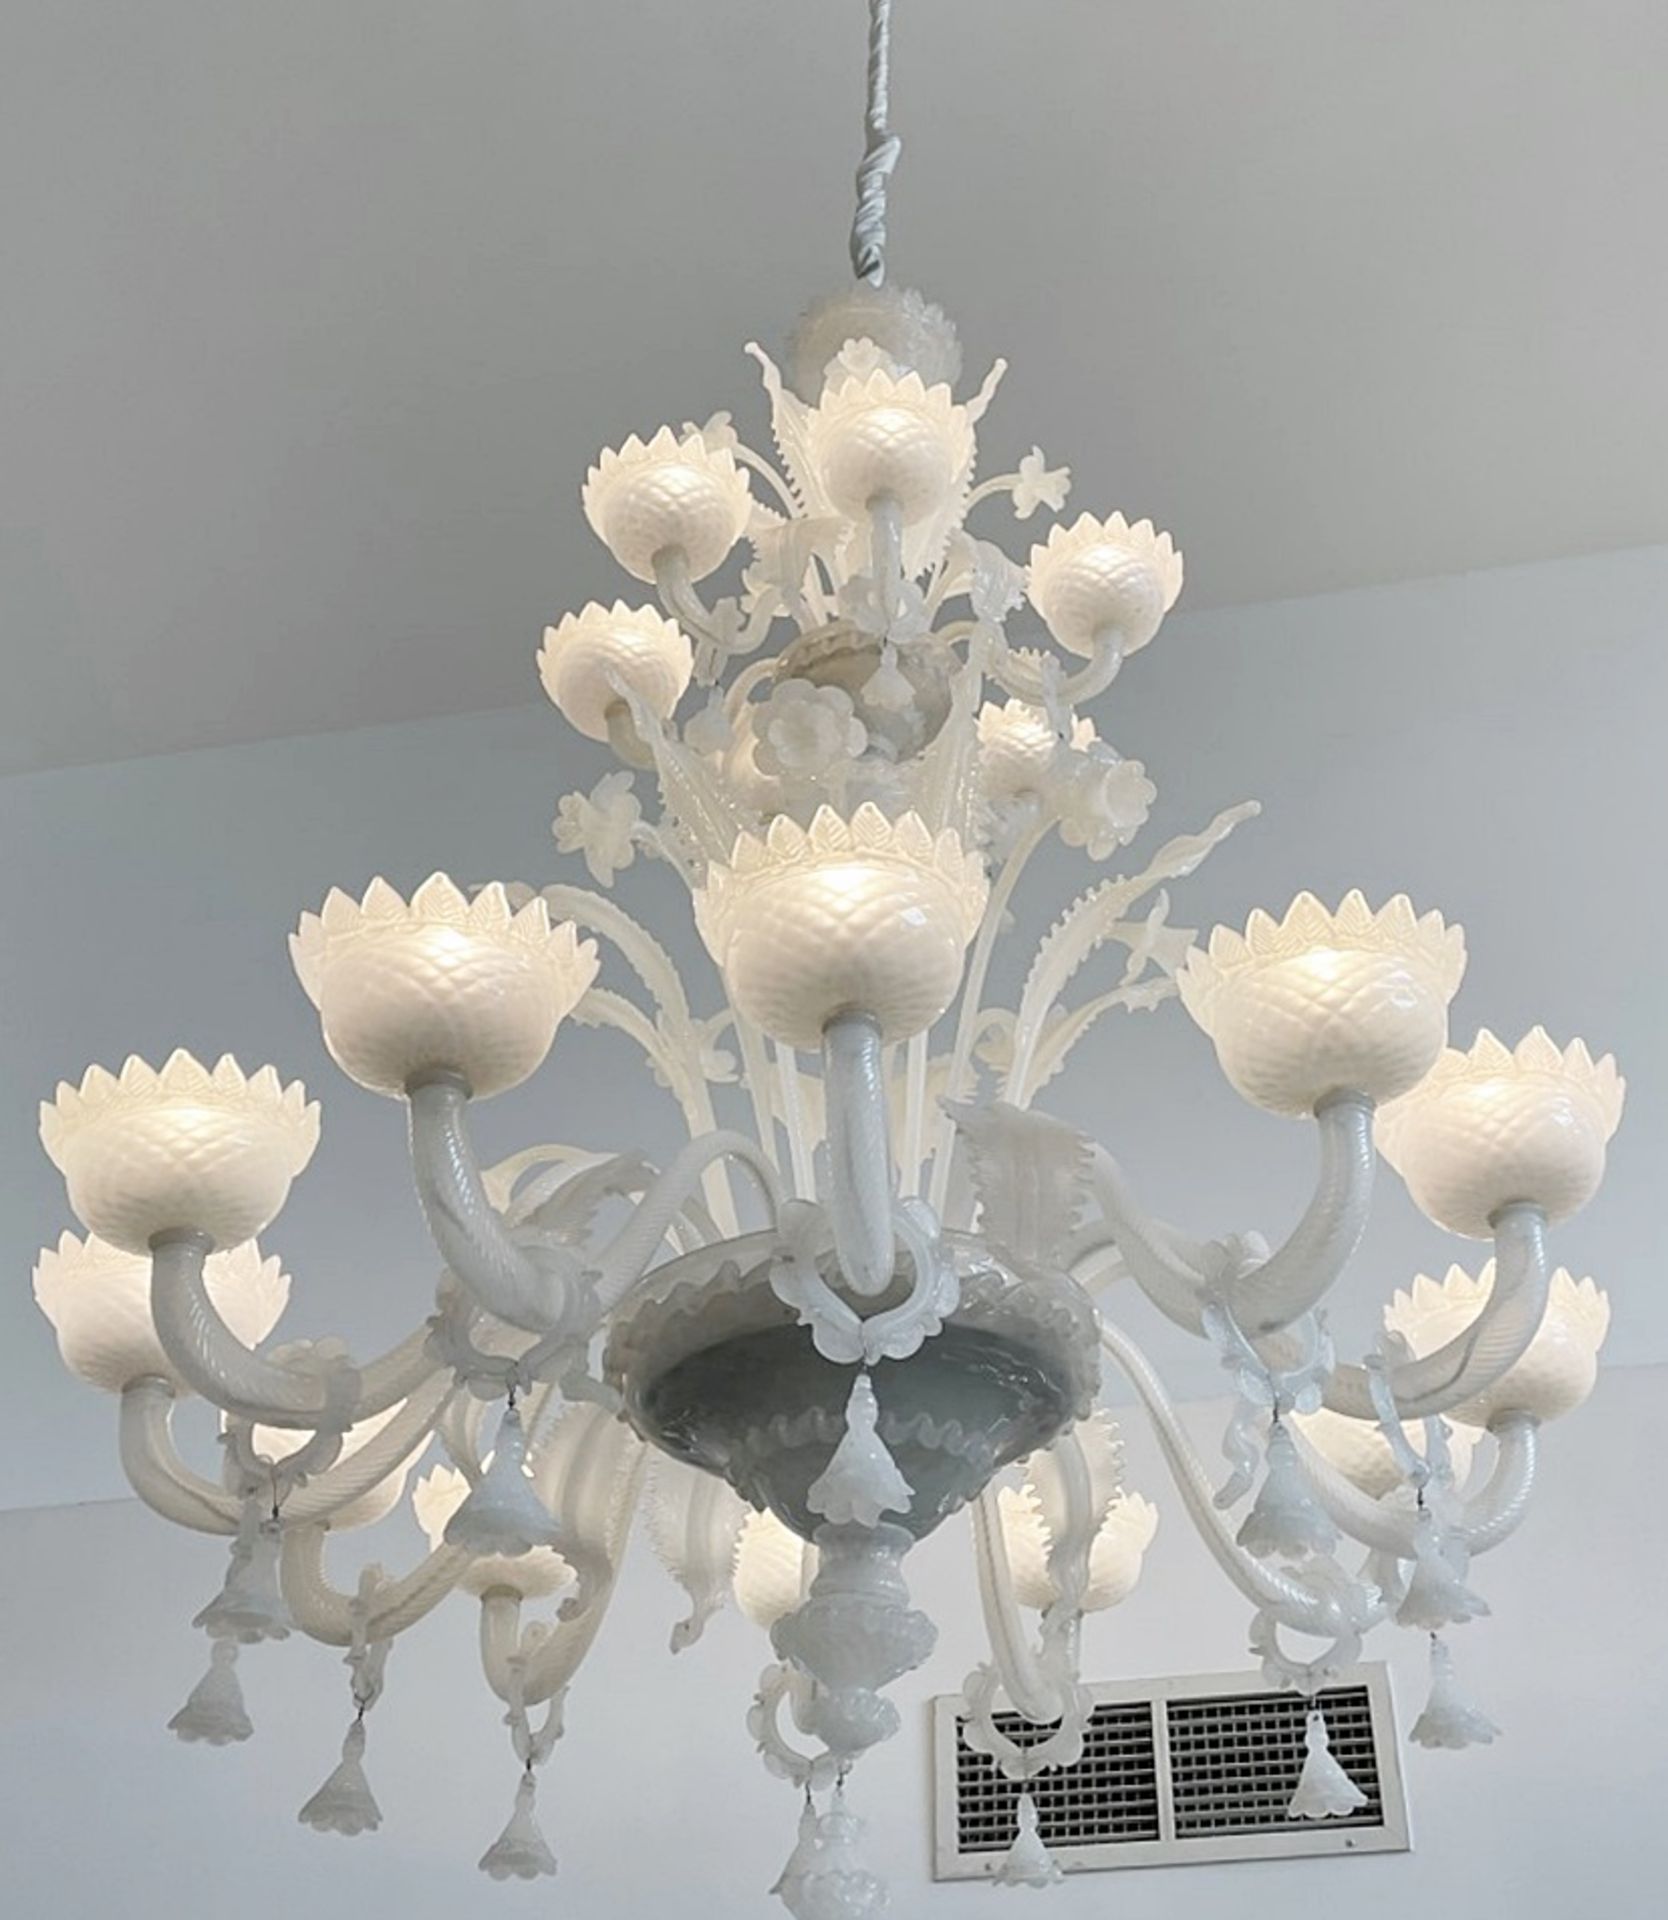 1 x Huge 1.8 Metre Tall Handcrafted 18-Arm Opal Glass Chandelier - Stunning Item - Ref: MHB137 -